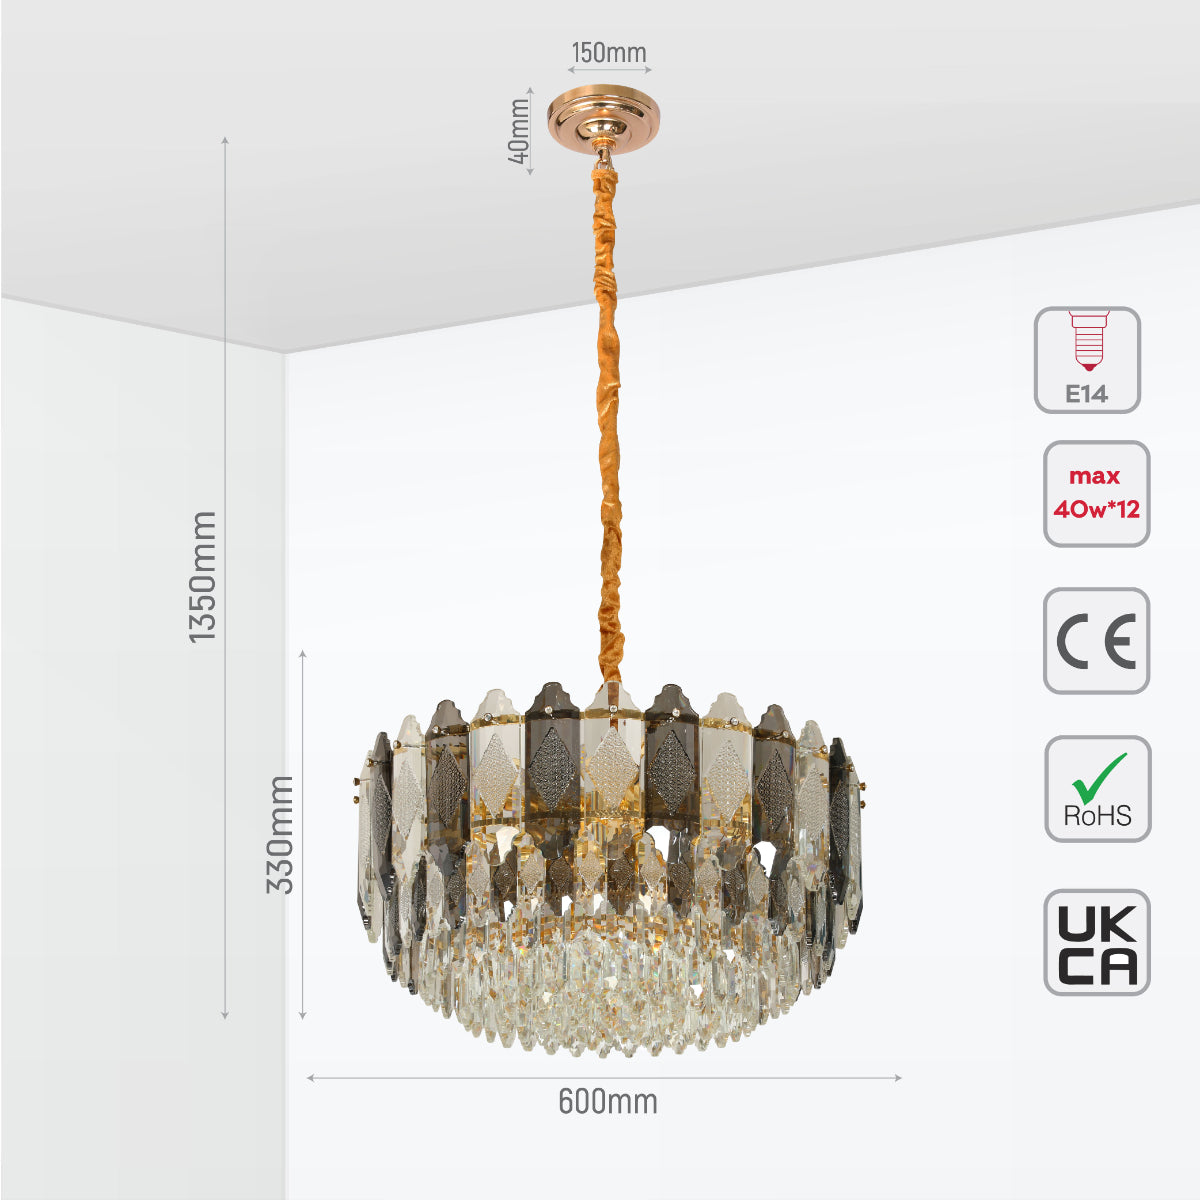 Size and certifications of Deluxe Smoky Clear Crystal Modern Chandelier Light Gold | TEKLED 159-18003